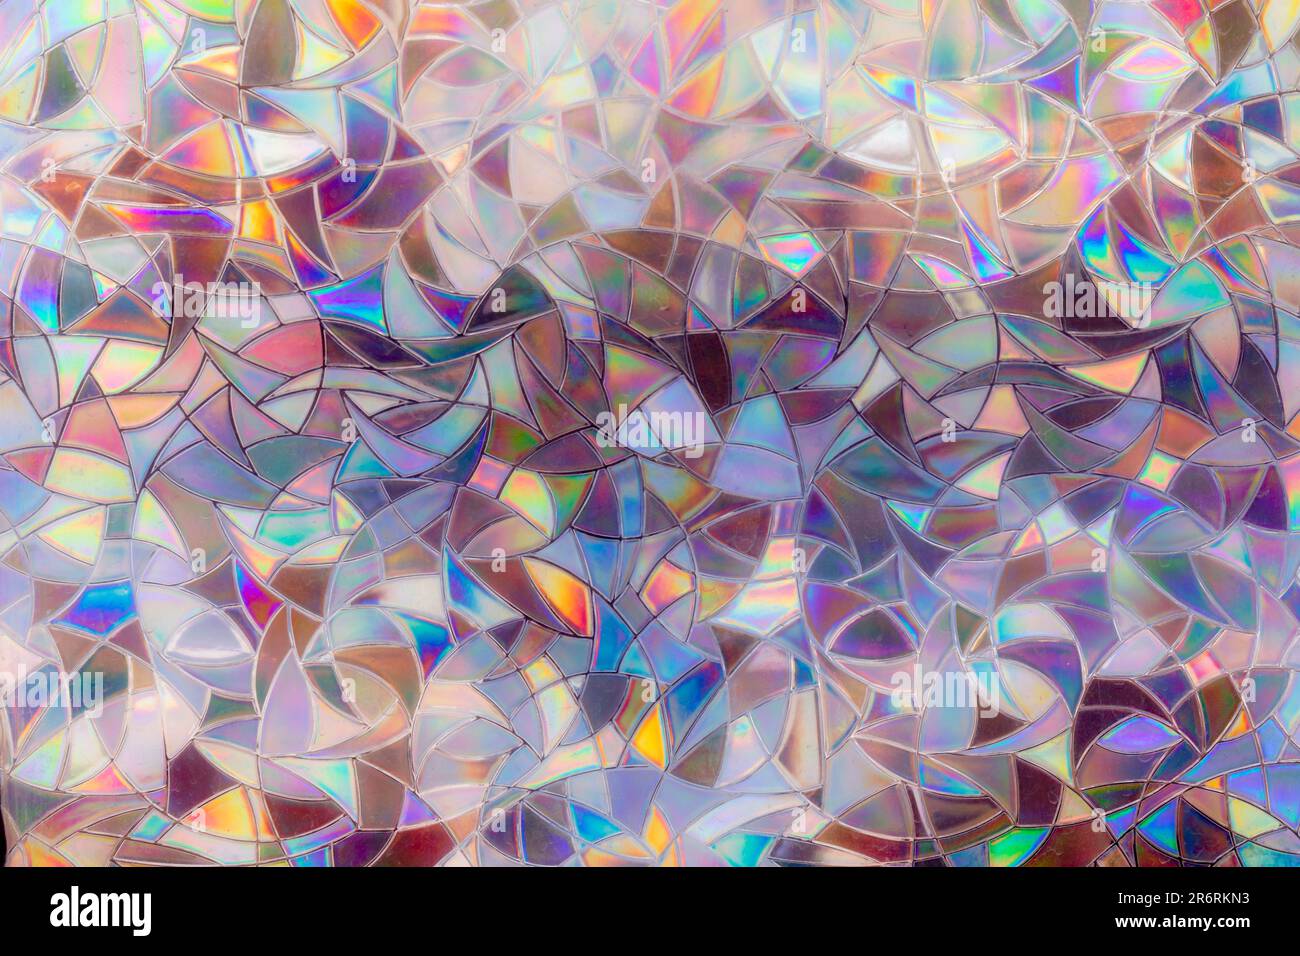 Stained glass door pane.  Modern stained glass abstract pattern. Stock Photo